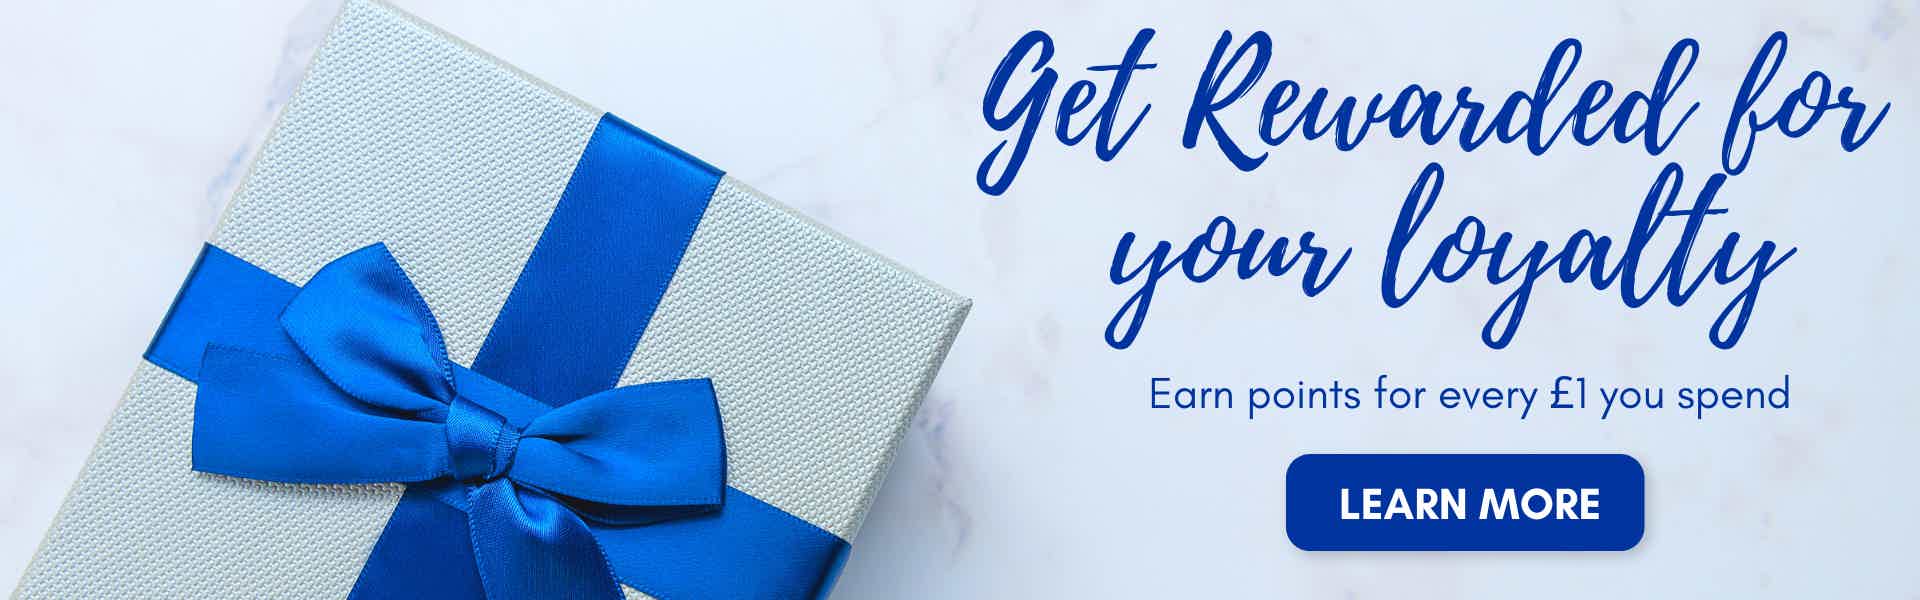 Get Rewarded for your loyalty button